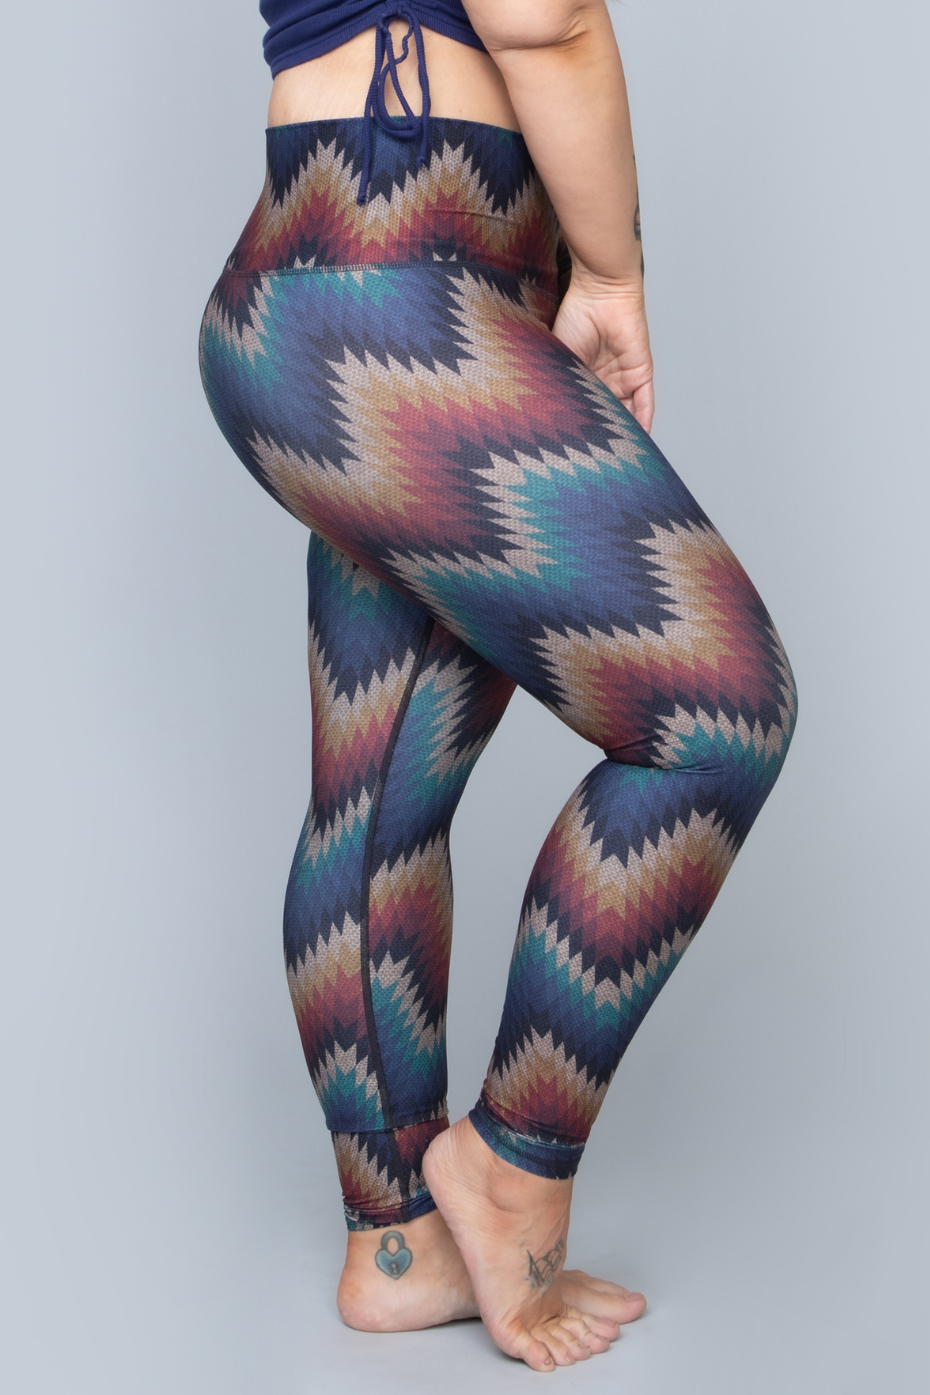 Neon Aztec Gypset Legging - Yoga Clothing by Daughters of Culture